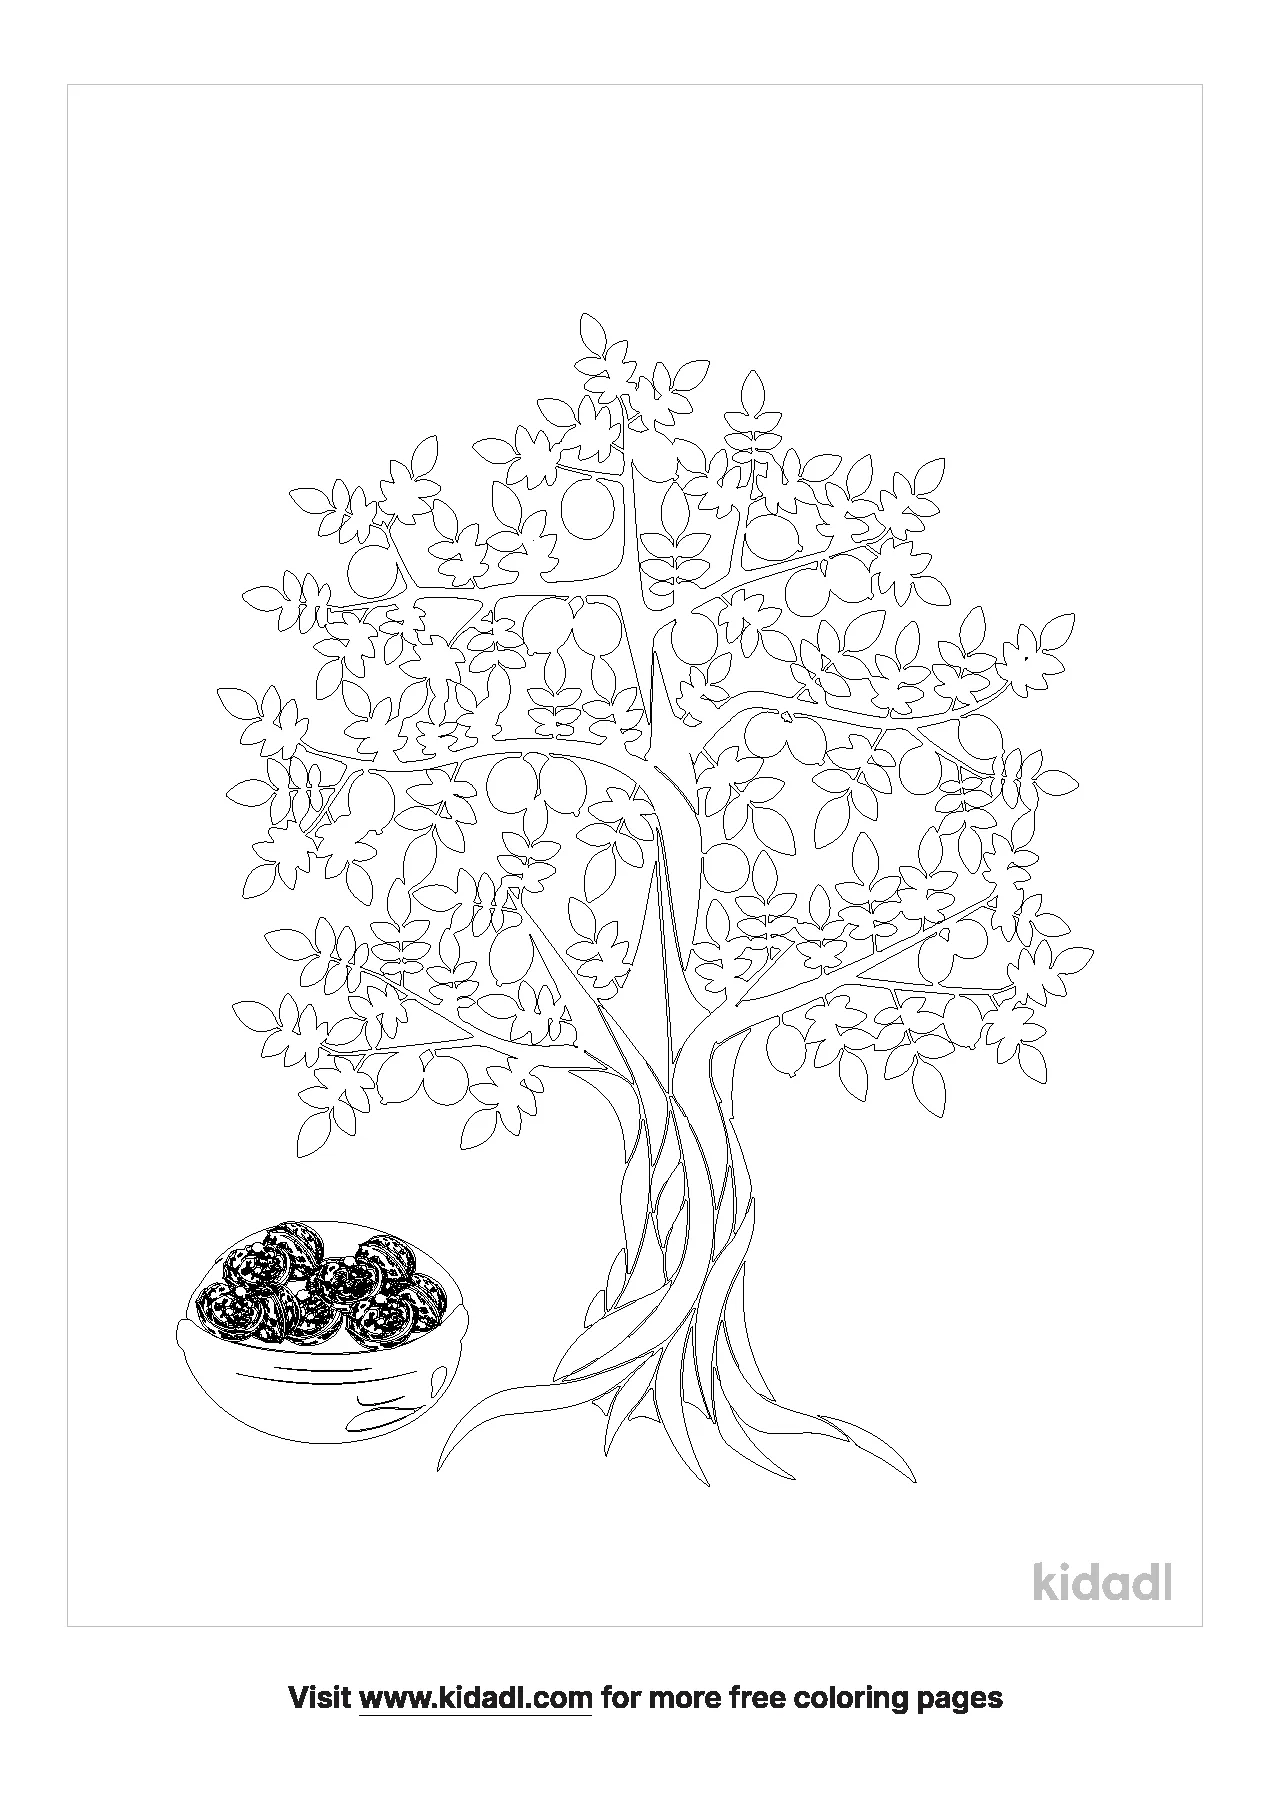 African Walnut Tree Coloring Page